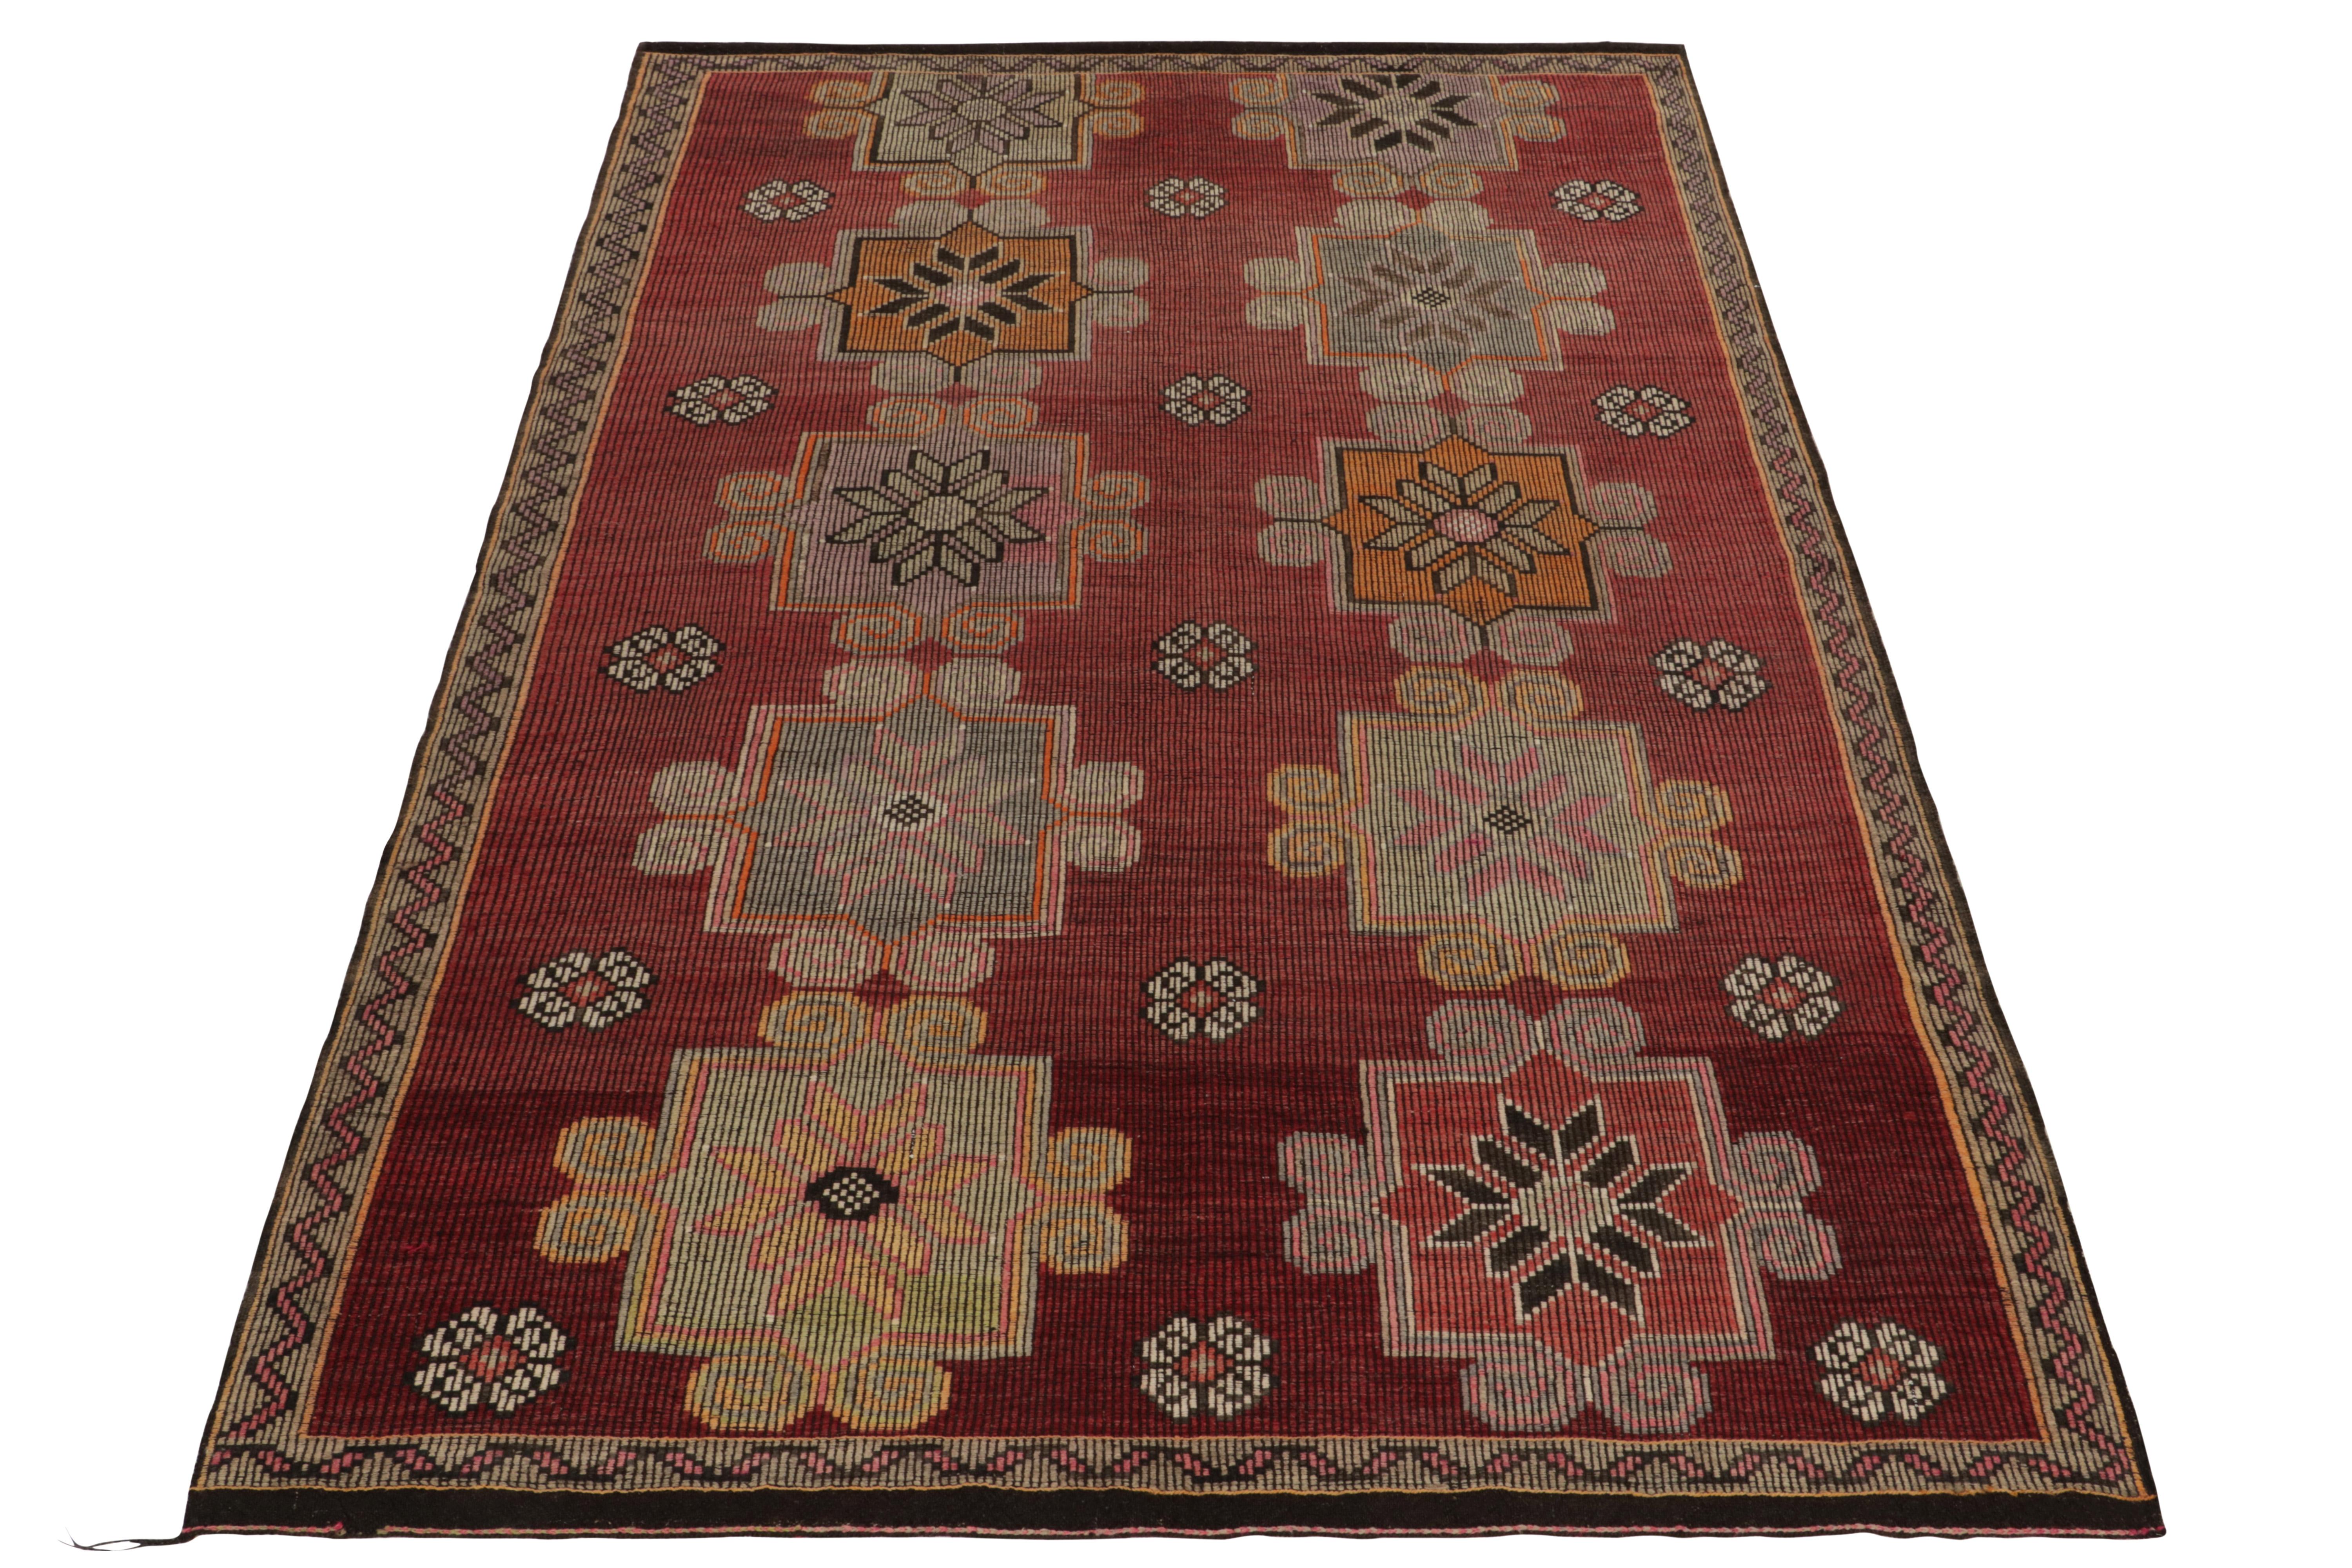 From the renowned Kurdish style, this 6x10 vintage Cecim kilim enjoys a coveted position in our newest flatweave curations. This particular mid-century flatweave rug from Turkey enjoys impeccable embroidery & detailing in rich red, orange, brown &